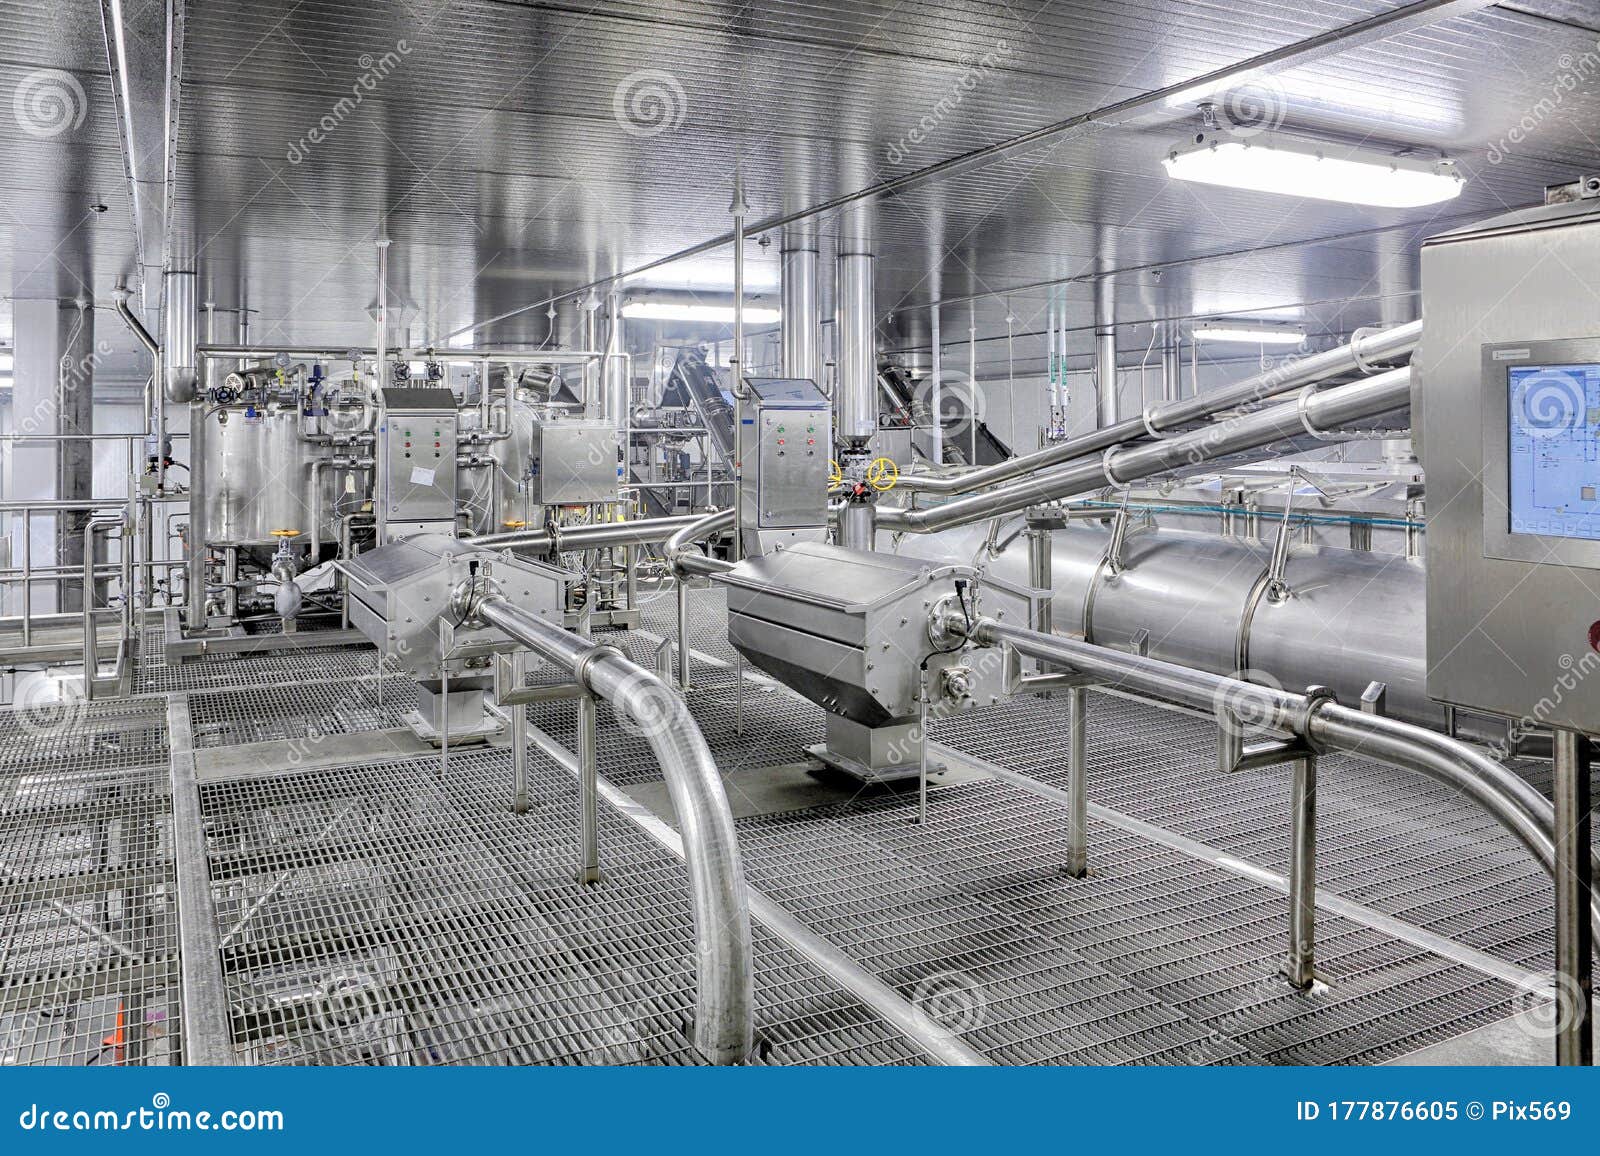 stainless steel food processing machinery